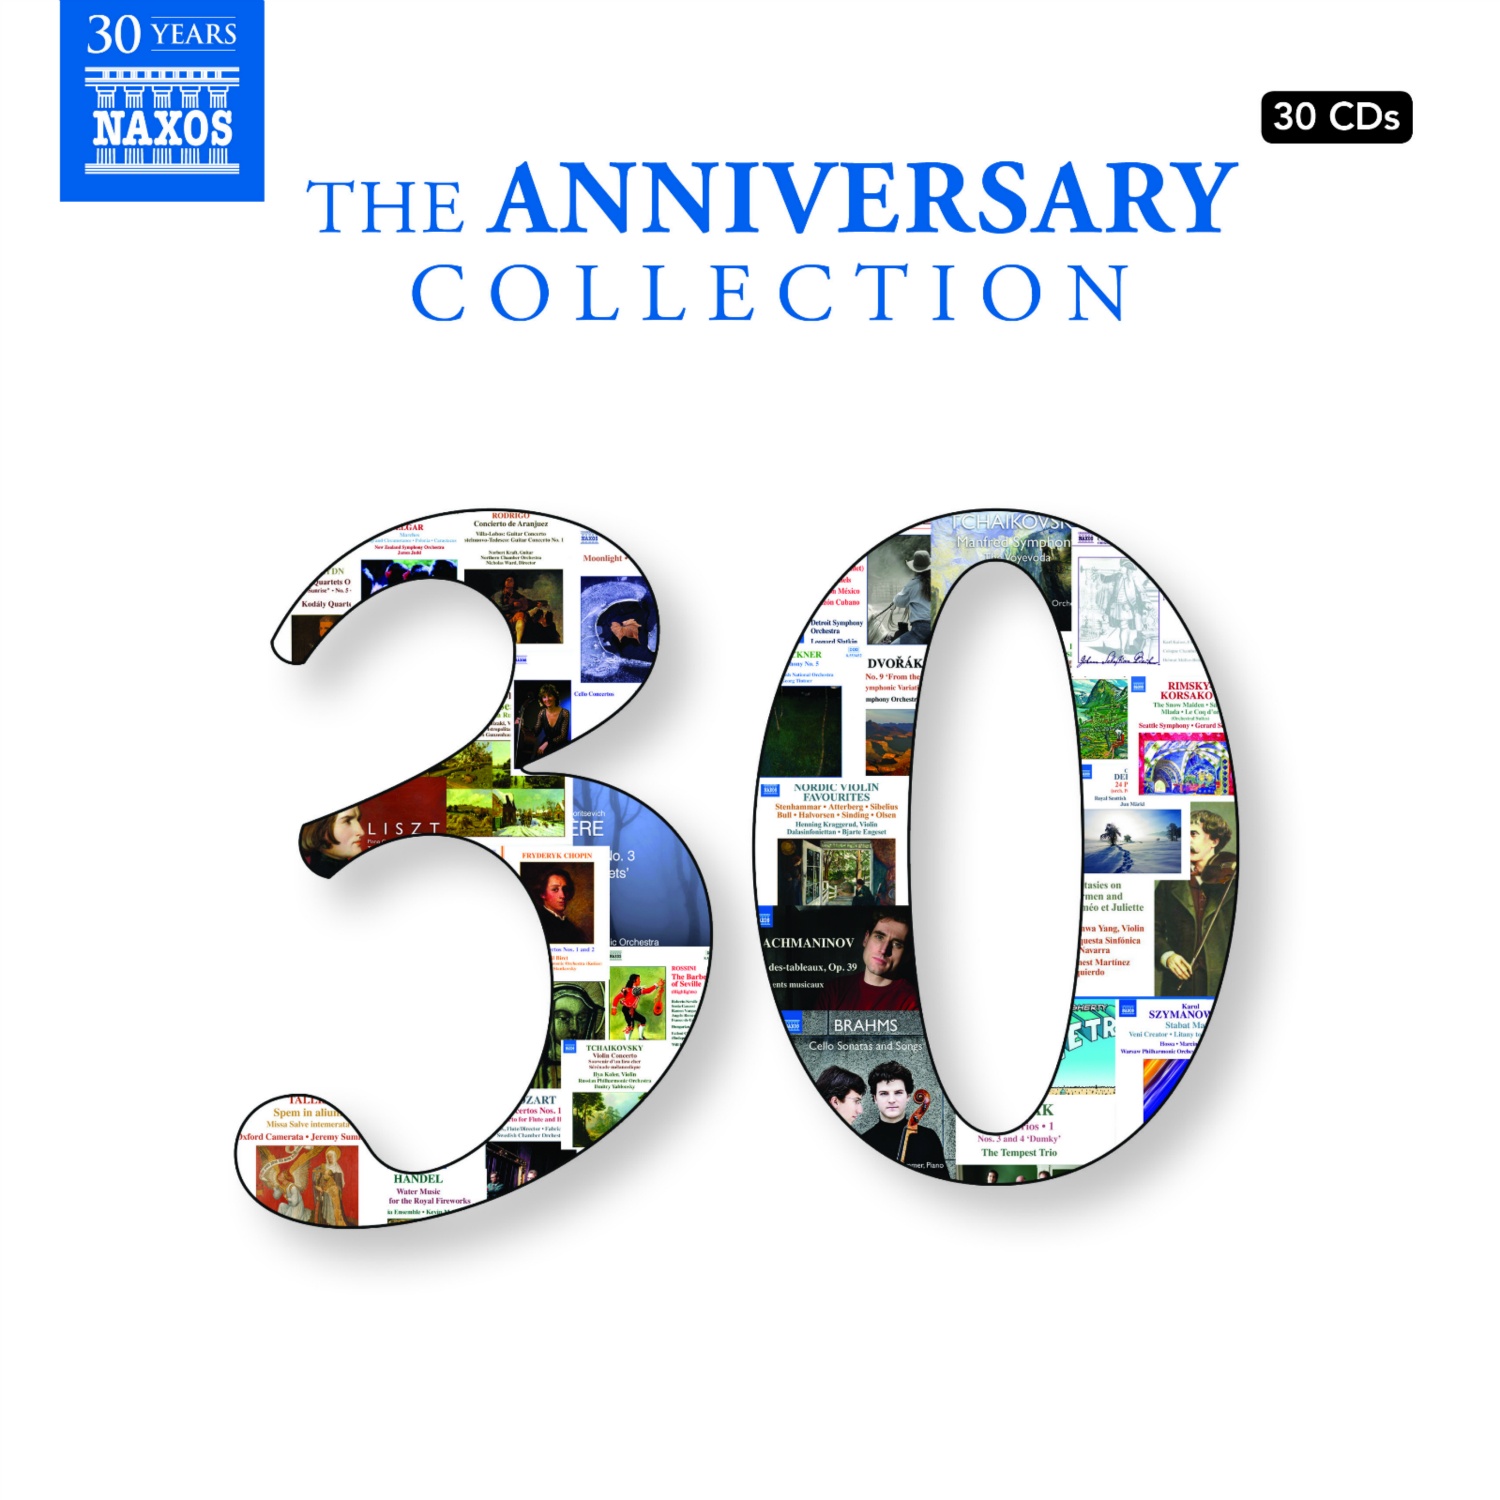 ANNIVERSARY COLLECTION (THE) - 30 CDs to Celebrate 30 Years of Naxos (30-CD Box Set)